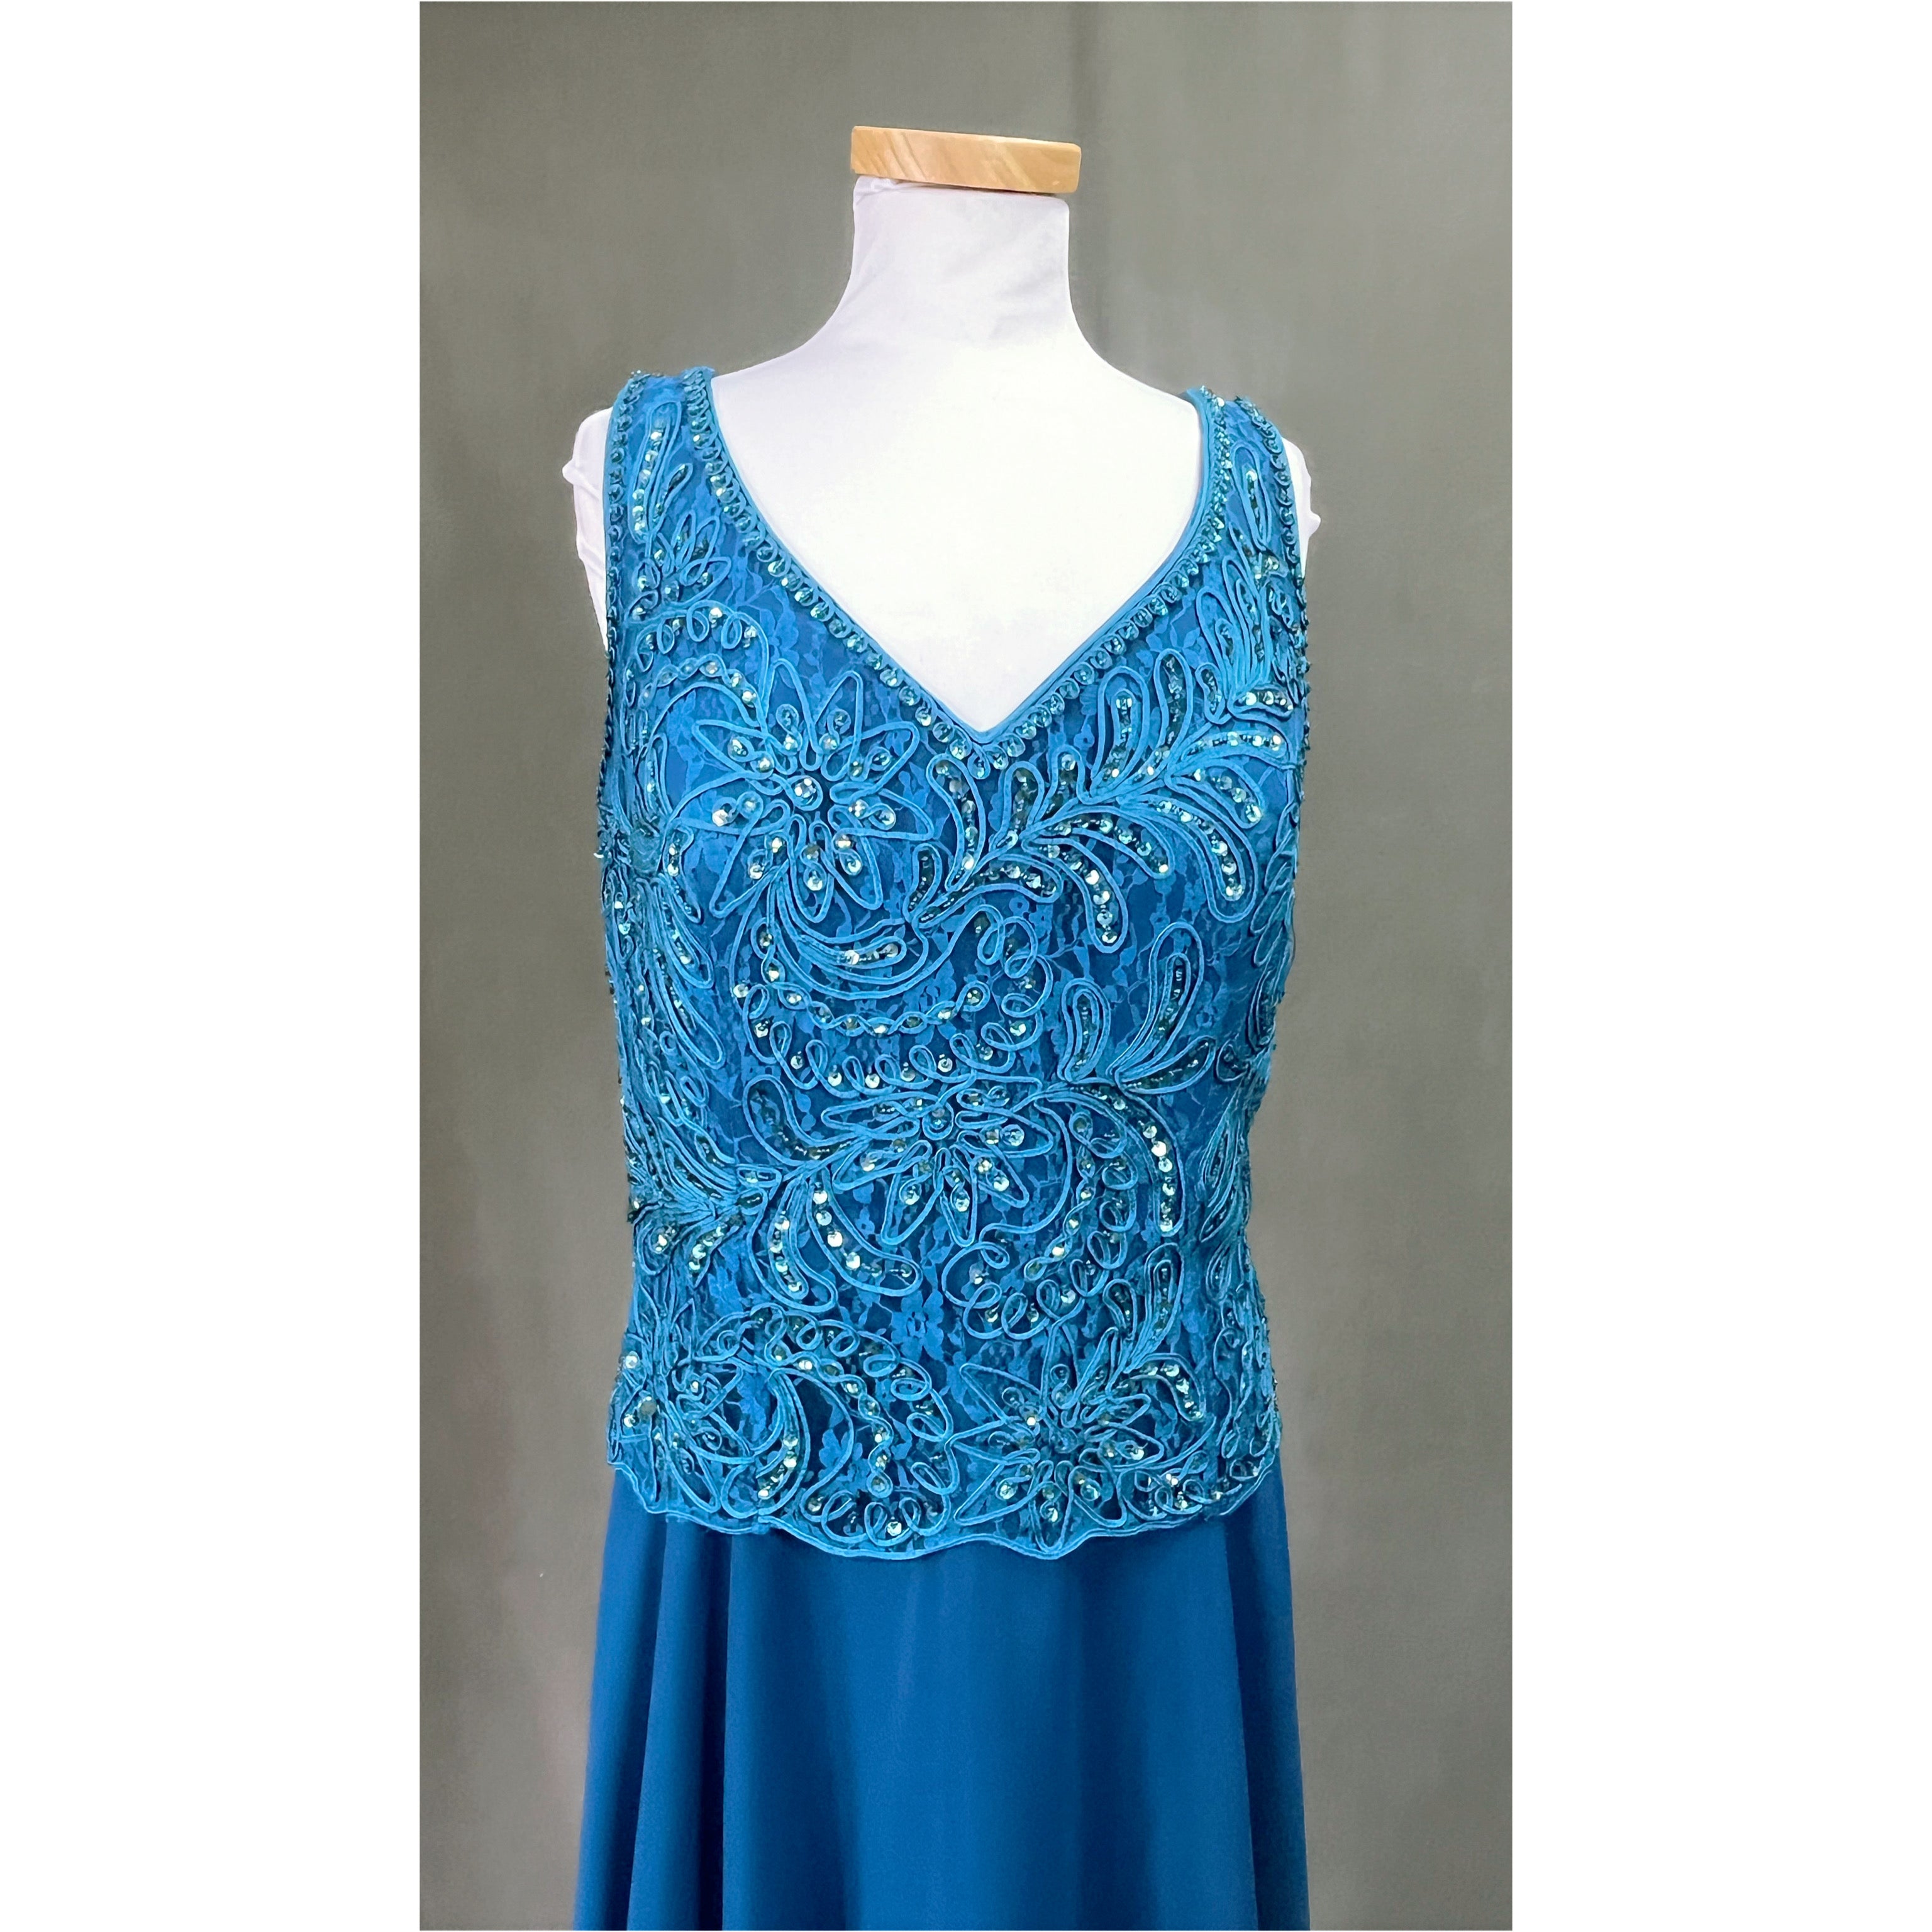 Cameron Blake Prussian blue dress, size 14, NEW WITH TAGS!